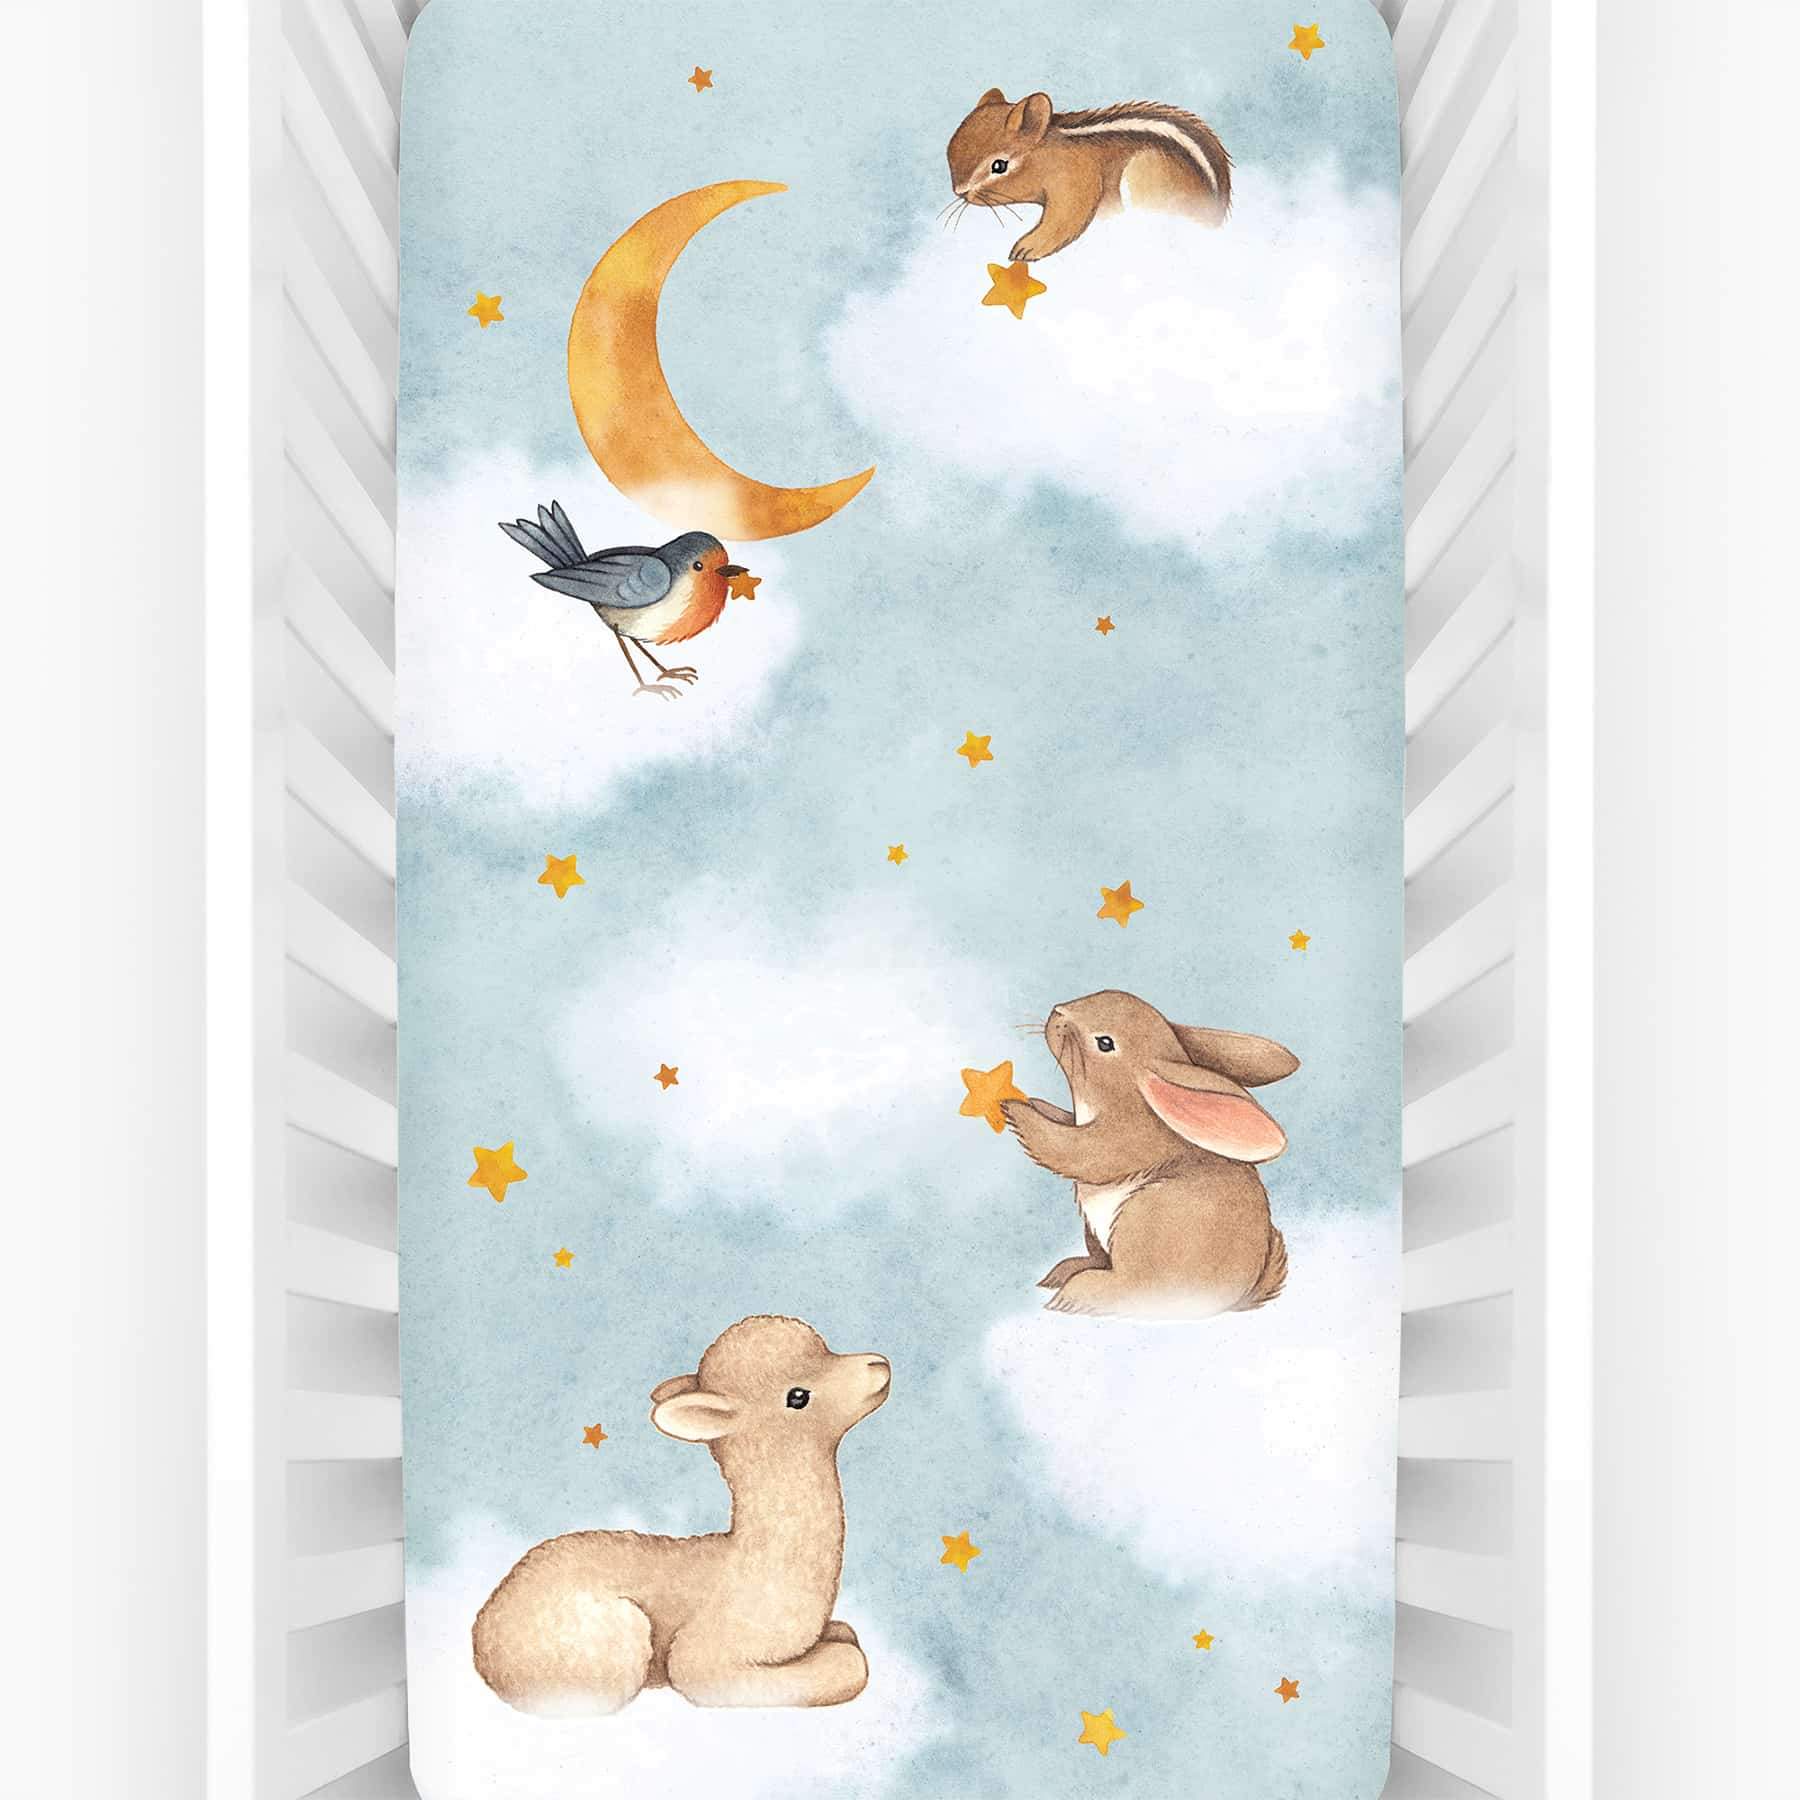 Rookie Humans crib sheet Goodnight Wonderland, fitted crib sheet with llama bunny bird moon stars and chipmunk. Light blue crib sheet with clouds. 